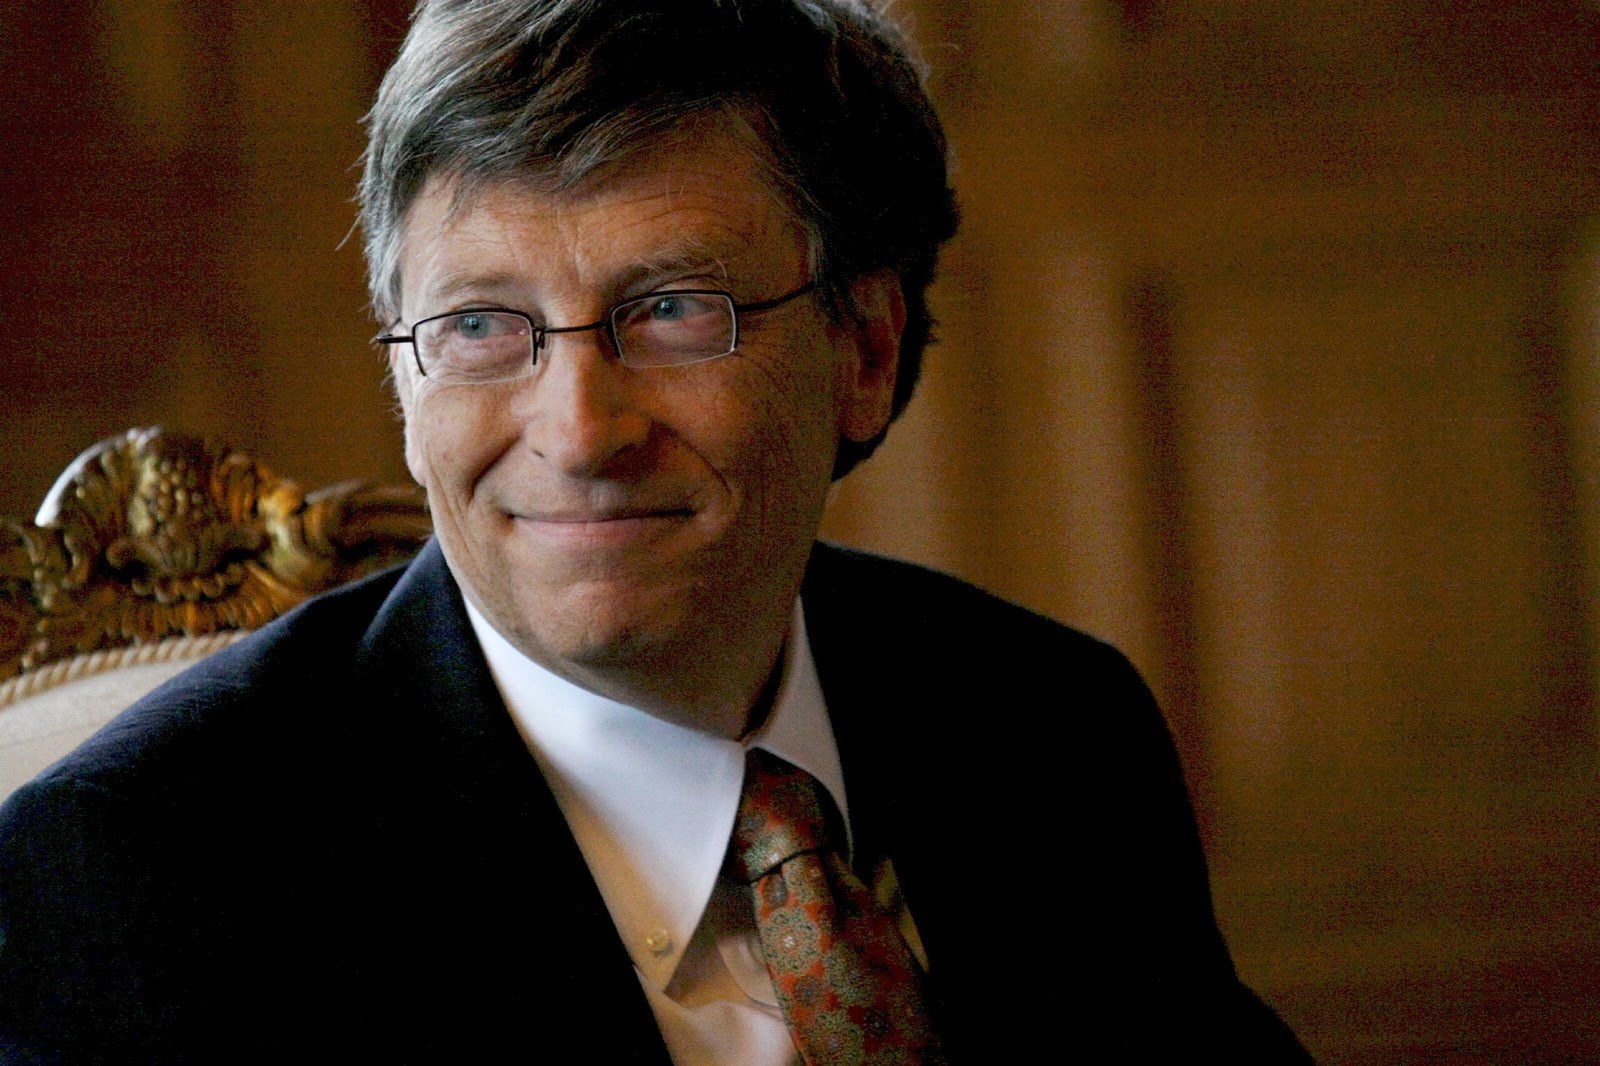 Bill Gates HD Wallpapers amp Pictures Hd Wallpapers 1600x1066